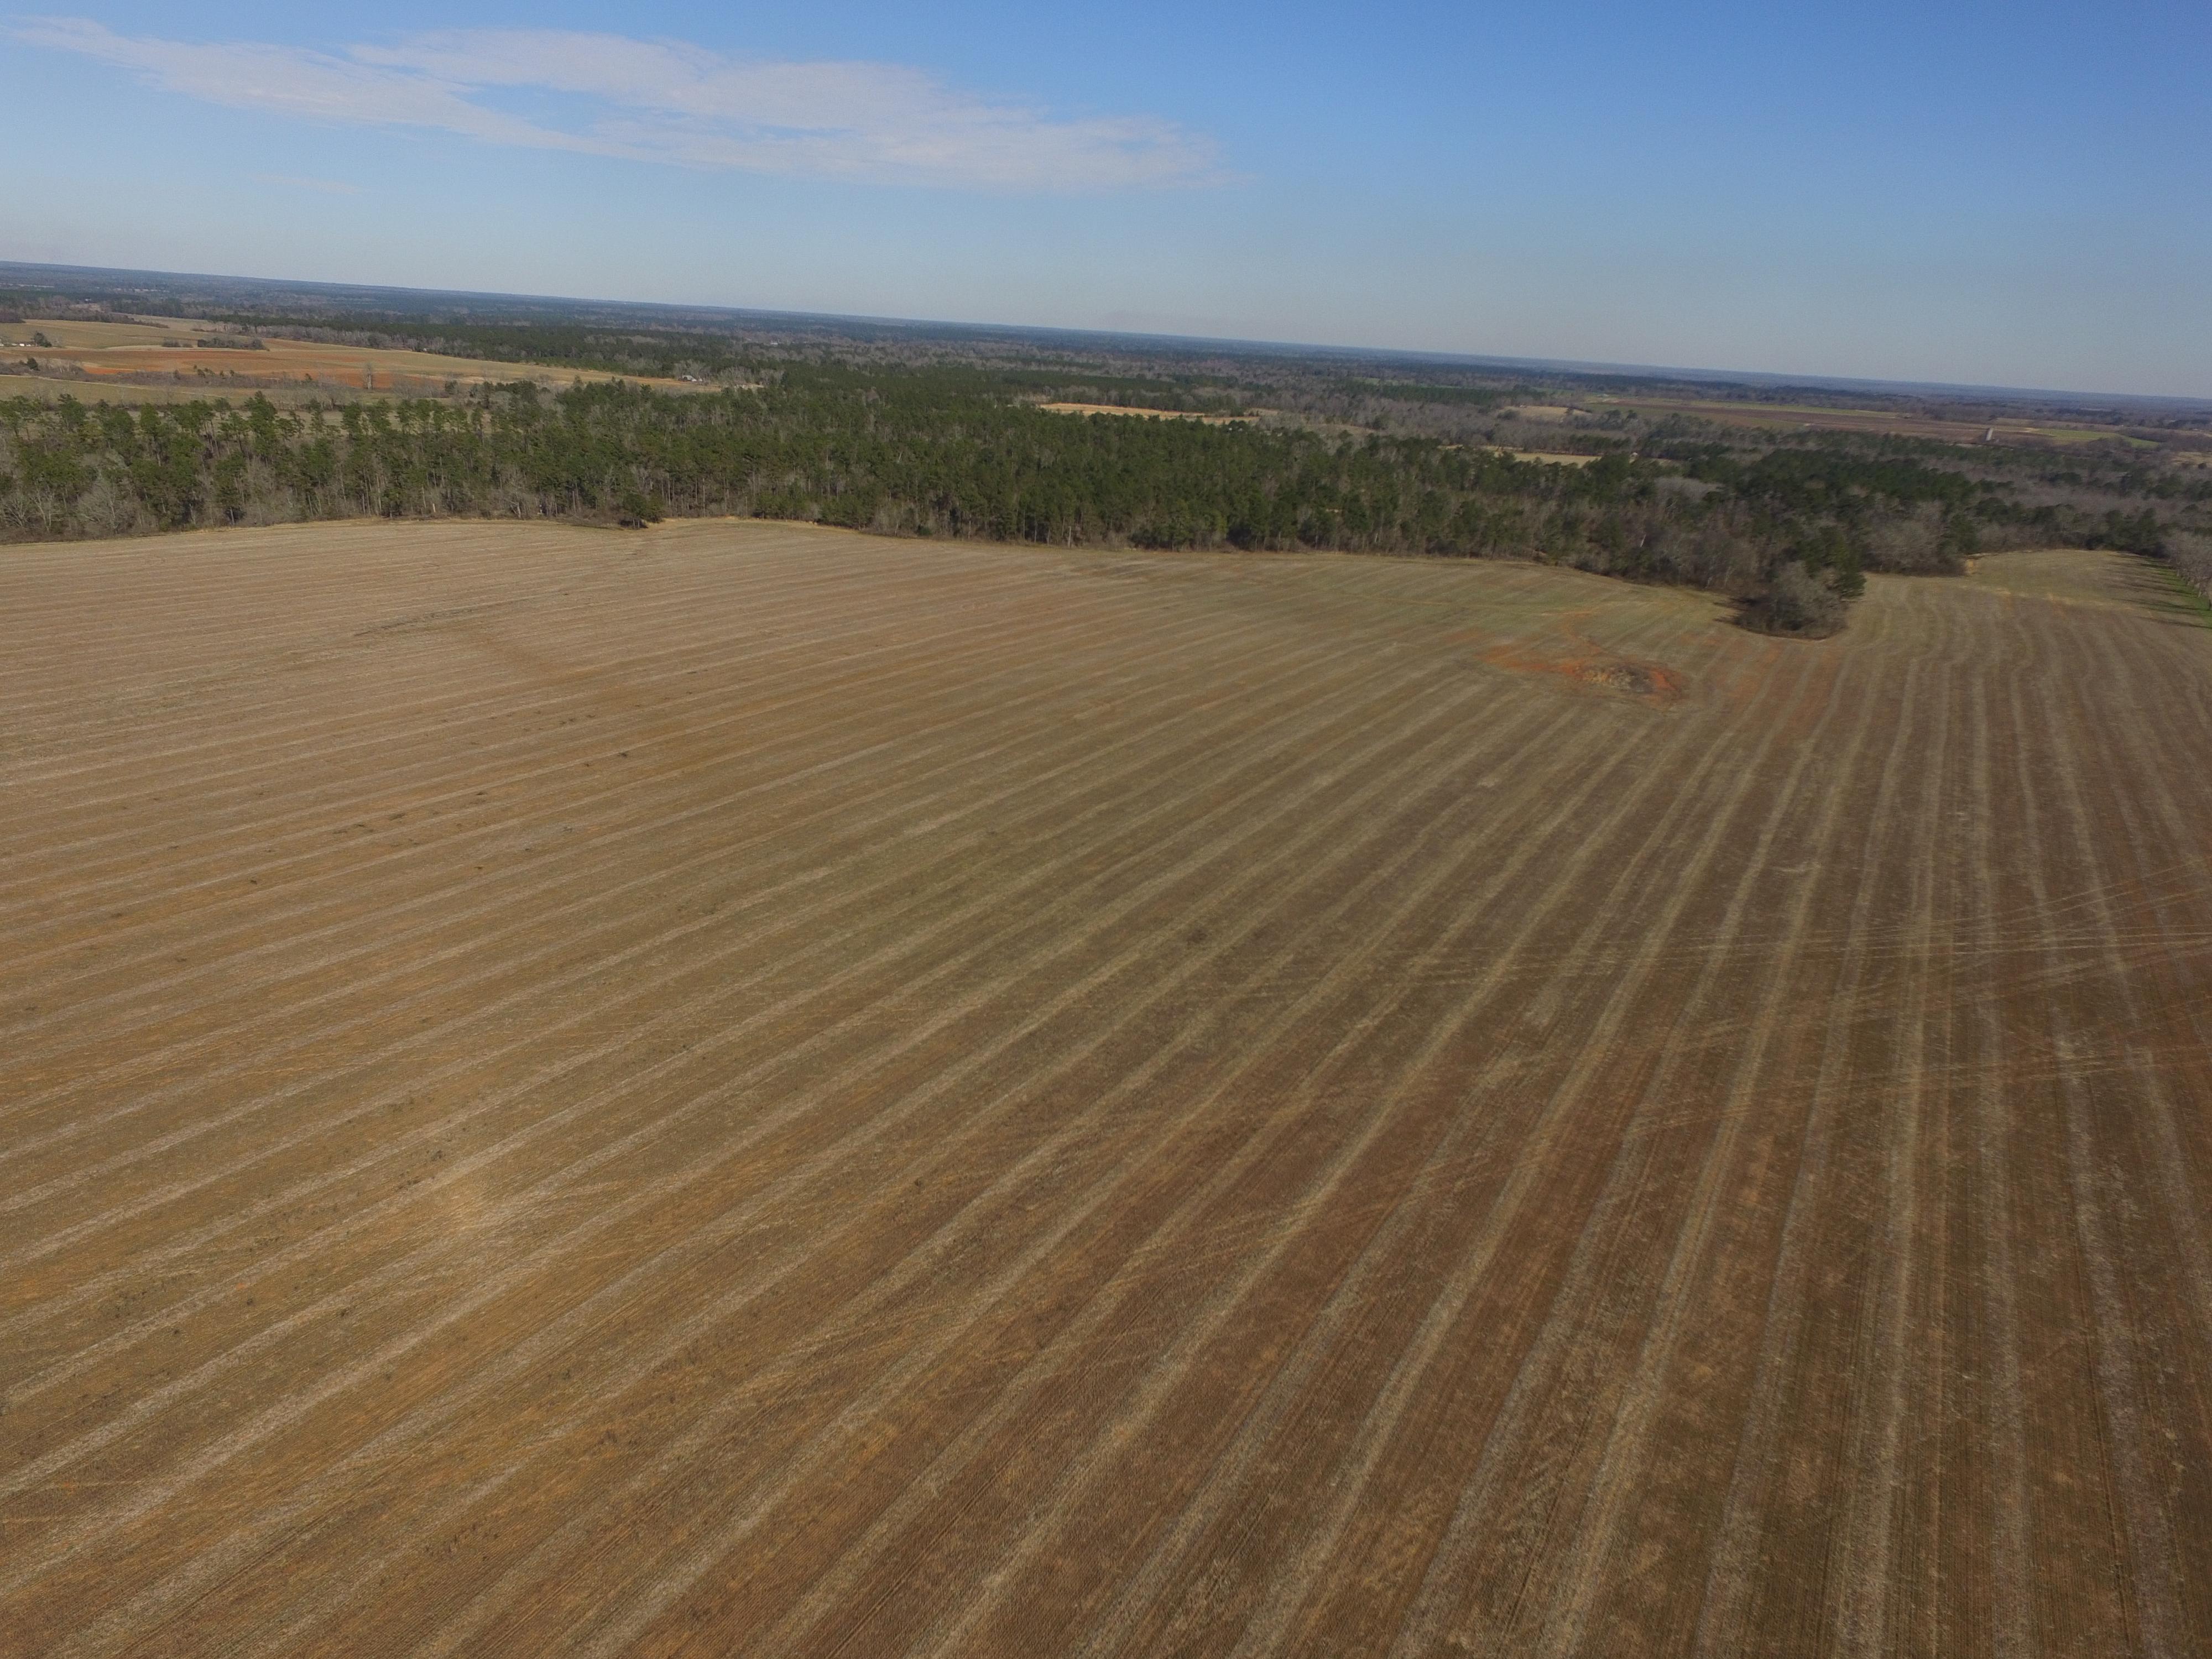 "CLARK ESTATE" - 252+/- TOTAL ACRES - EARLY COUNTY, GA